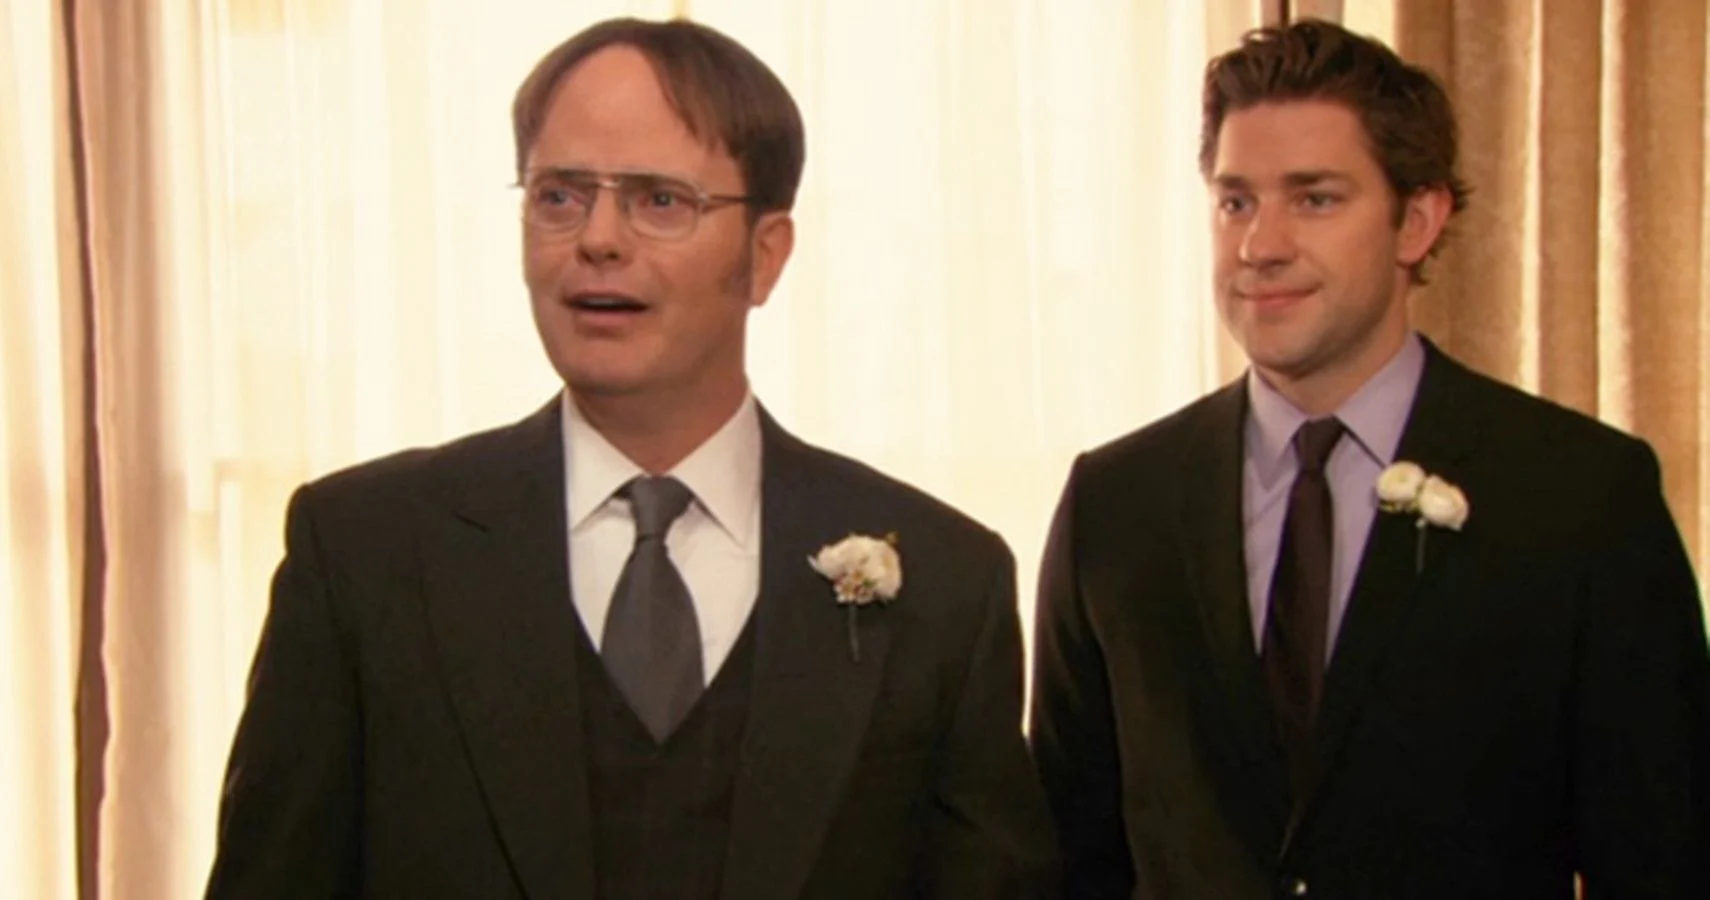 best the office episodes: Finale